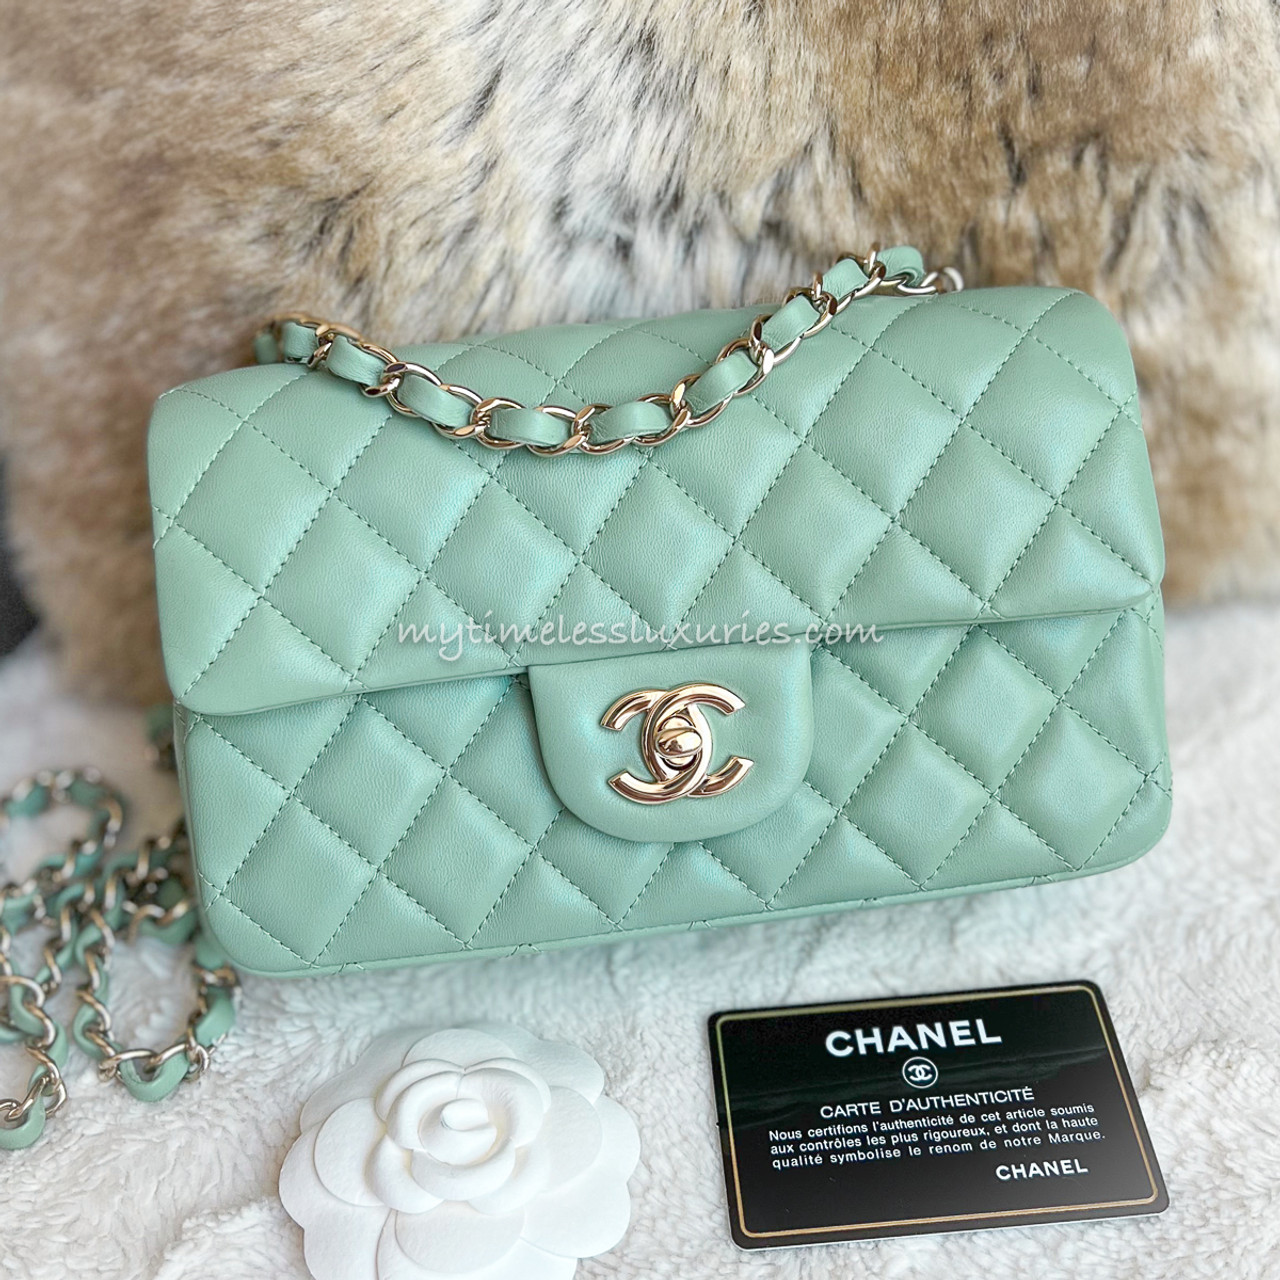 BAG of the Day 3: CHANEL MINI Rectangle Classic Flap patent Blue